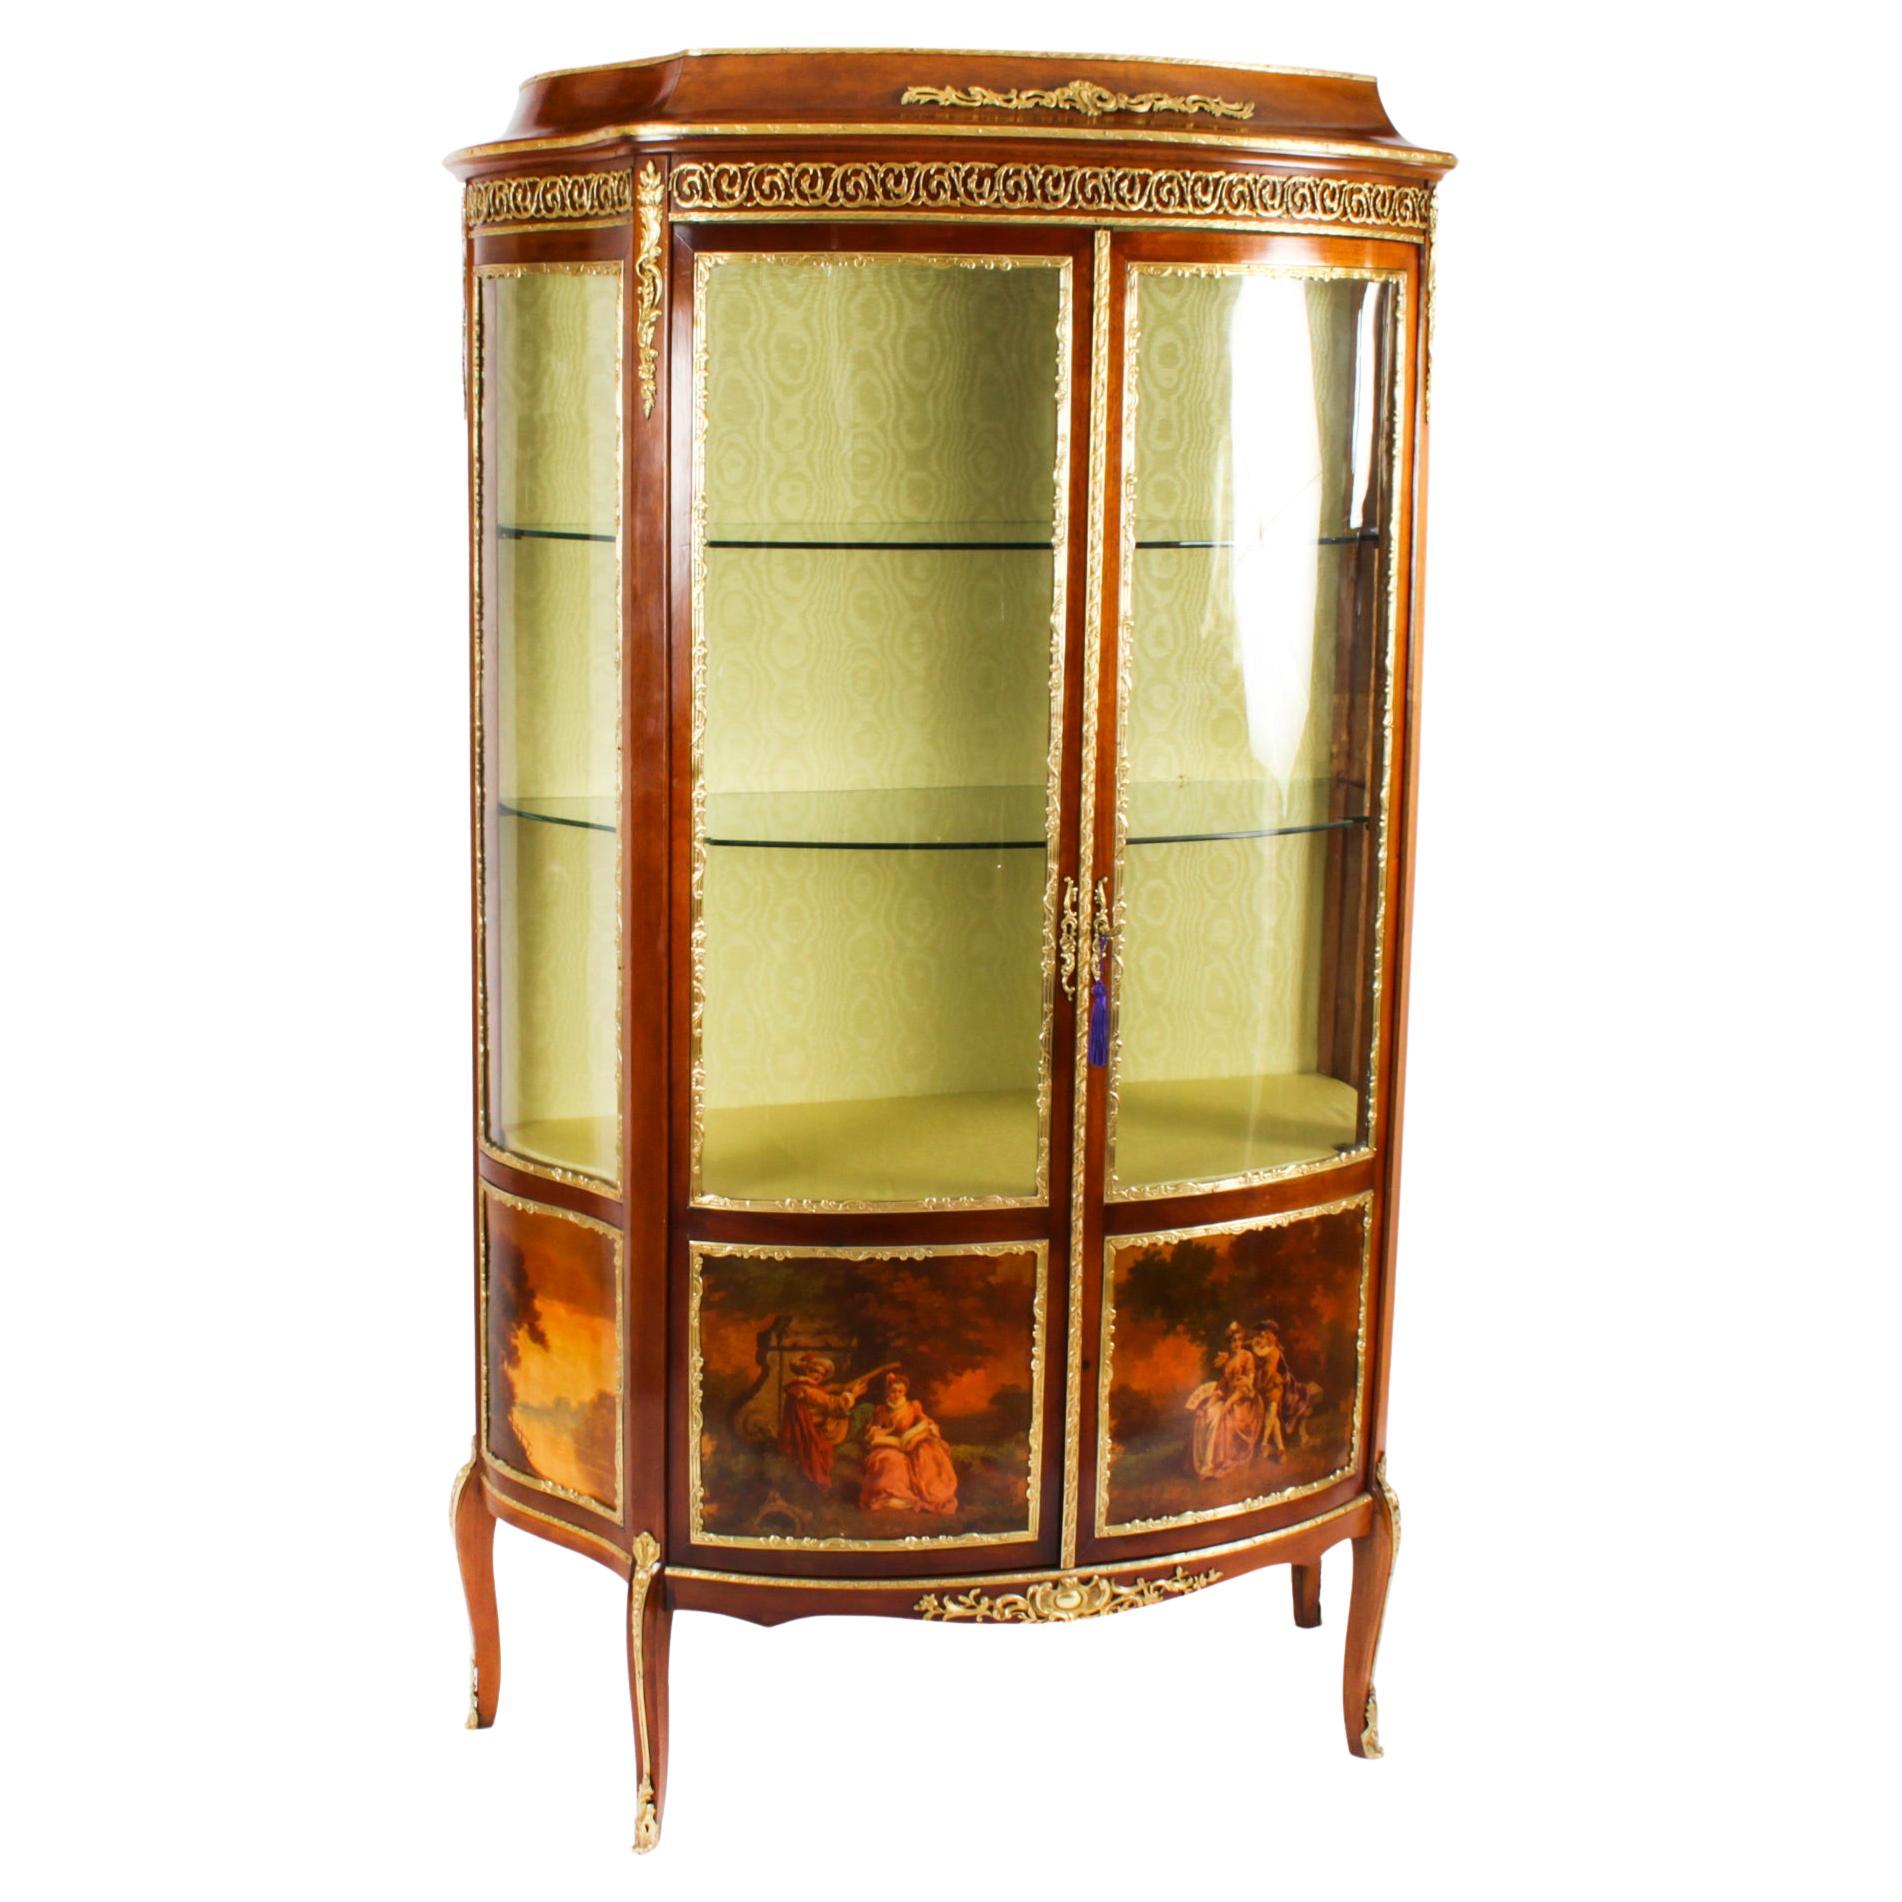 Antique French Louis Revival Vernis Martin Display Cabinet 19th Century For Sale